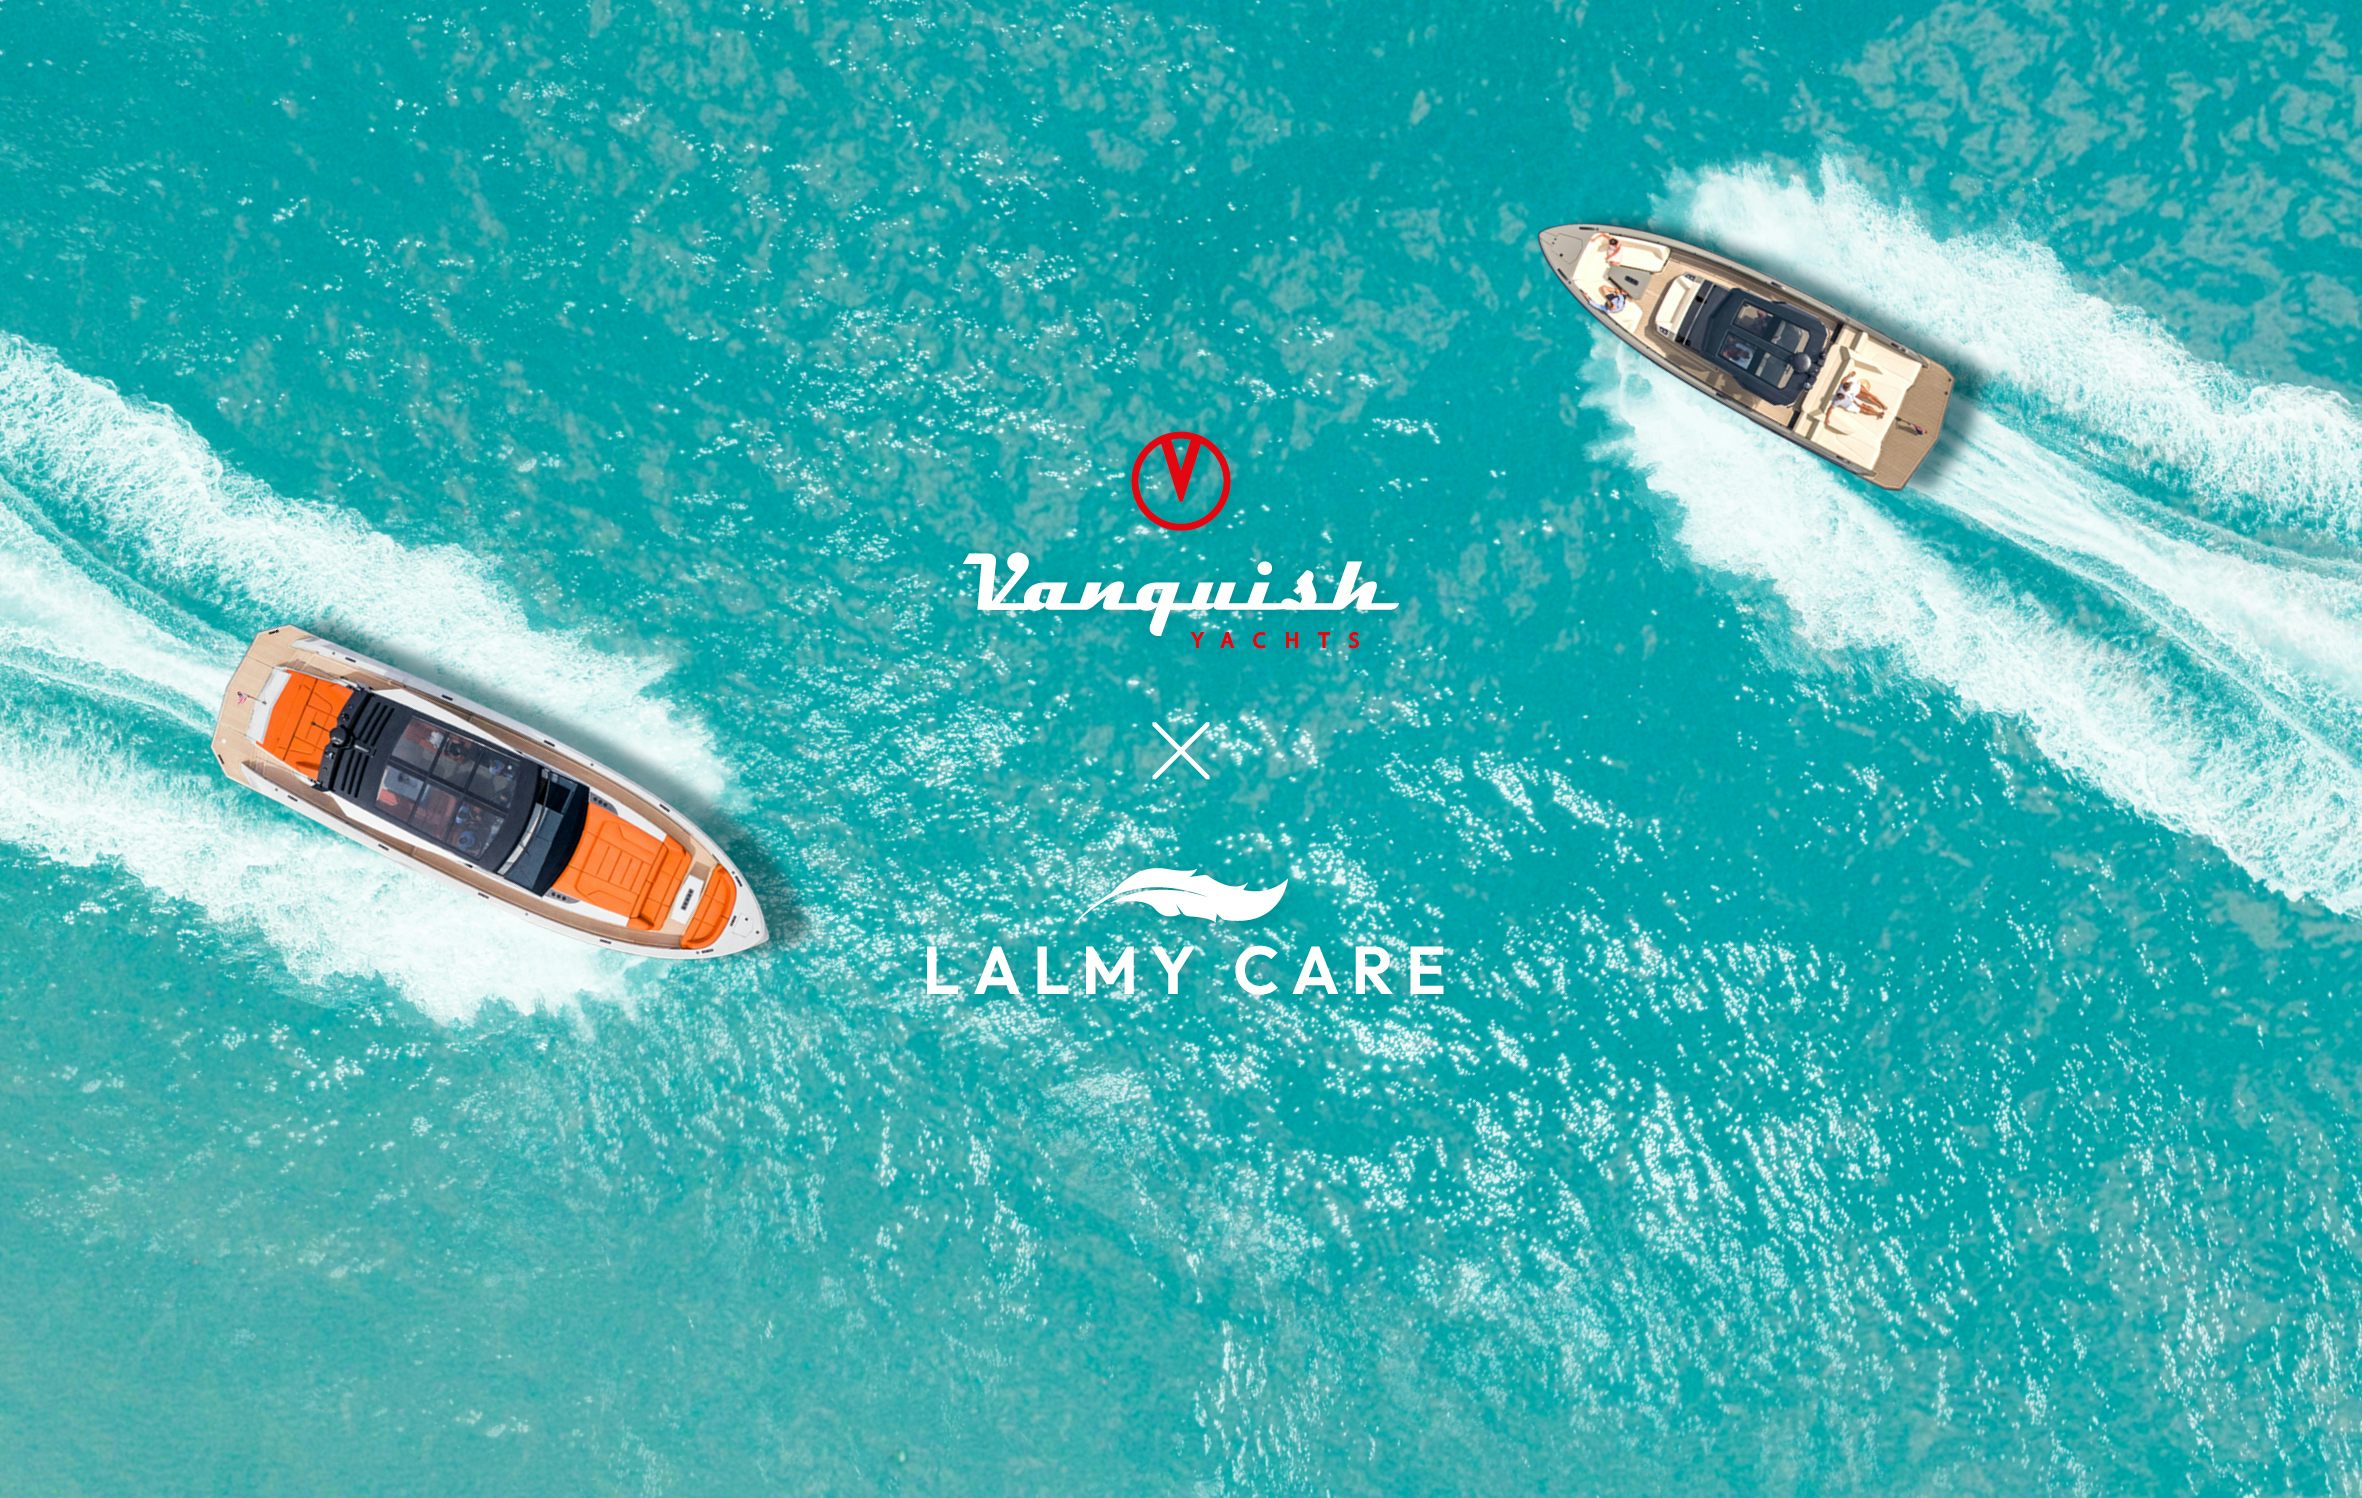 Vanquish Yachts signs partnership agreement with Lalmy Care